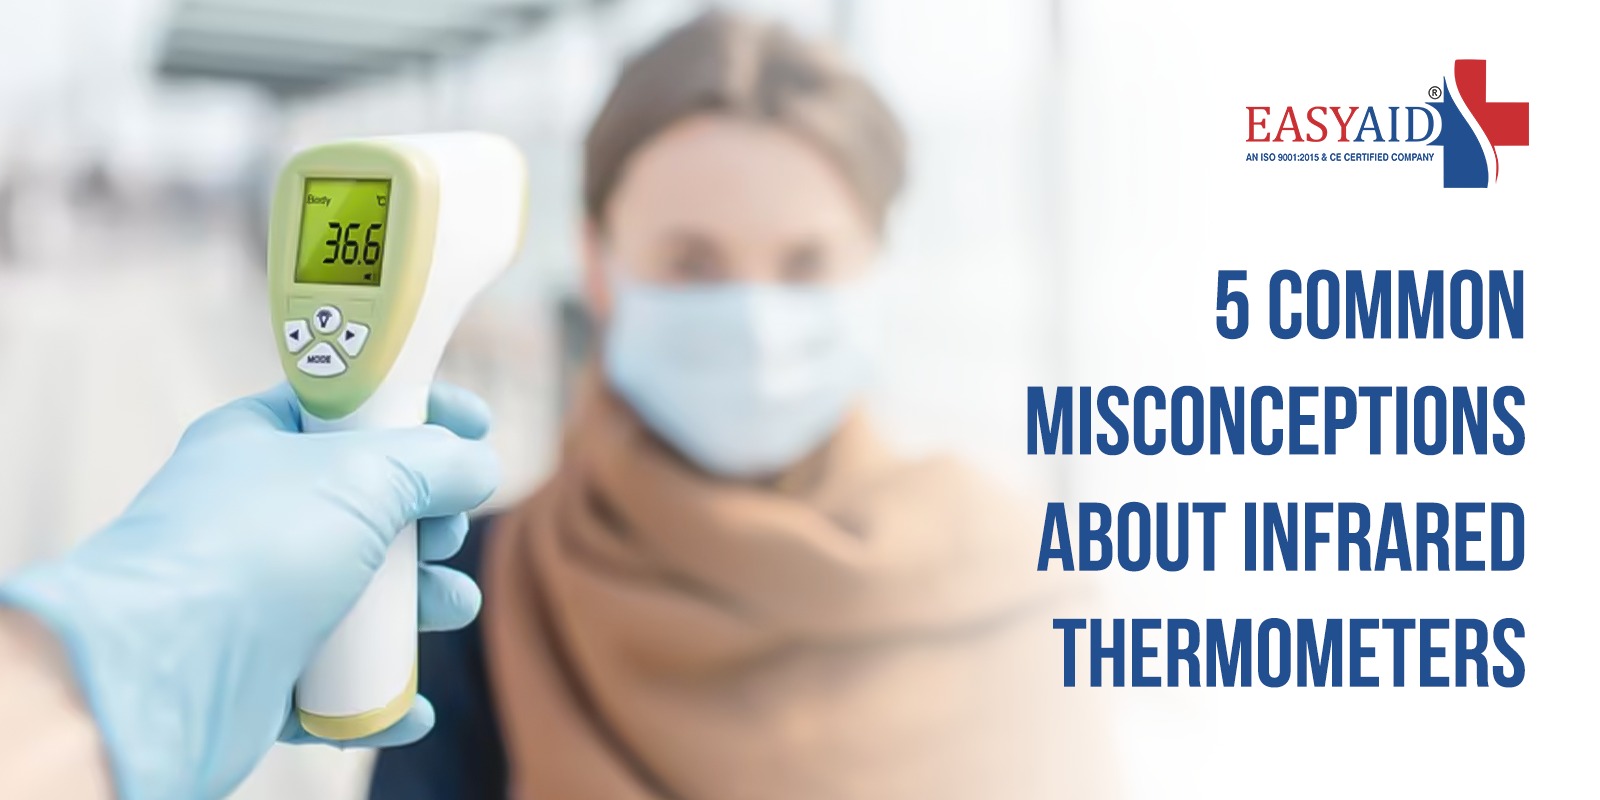 5 Common Misconceptions About Infrared Thermometers